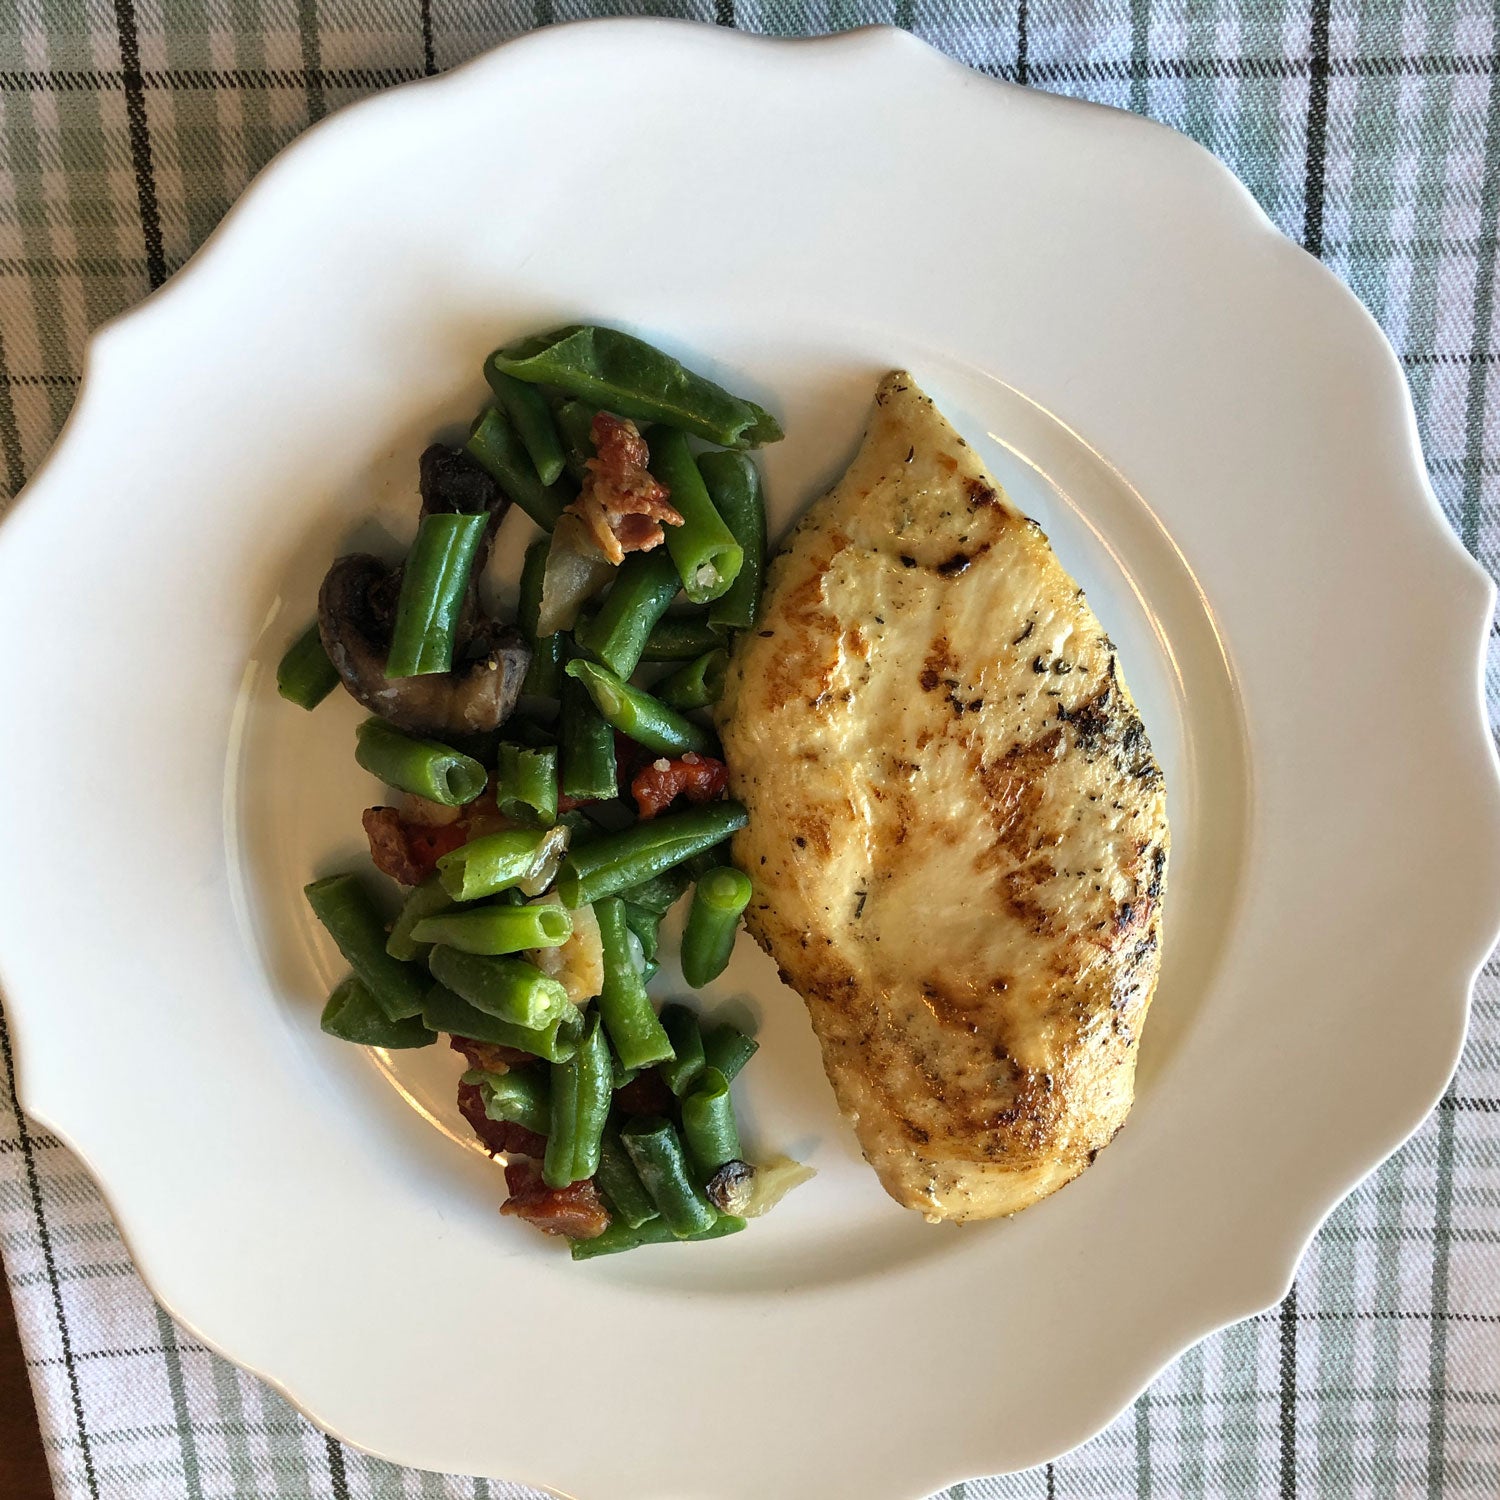 Kate's Lemon Grilled Chicken (Healthy Selection/Soy, Gluten, & Dairy Free)